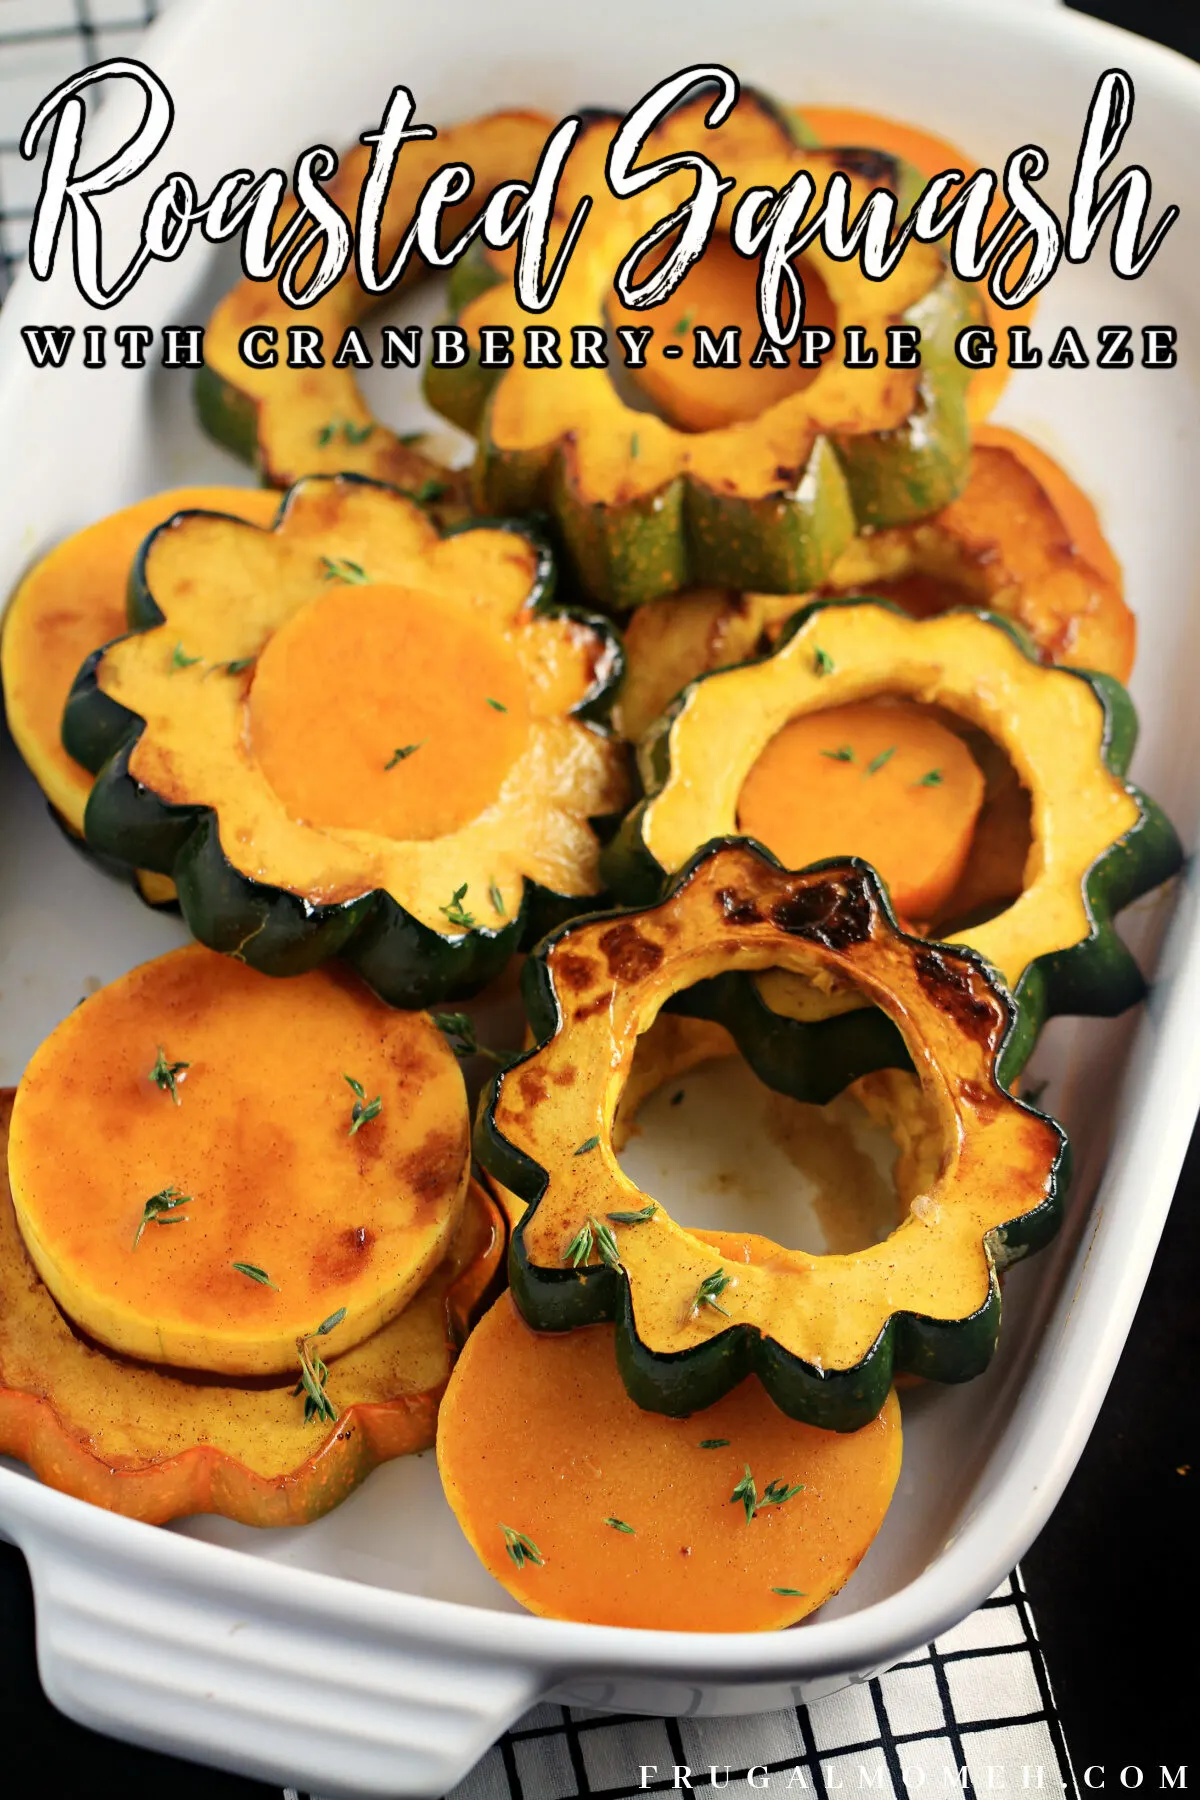 This Roasted Squash with Cranberry-Maple Glaze recipe makes for a perfect autumn side dish. A delicious Thanksgiving side dish!